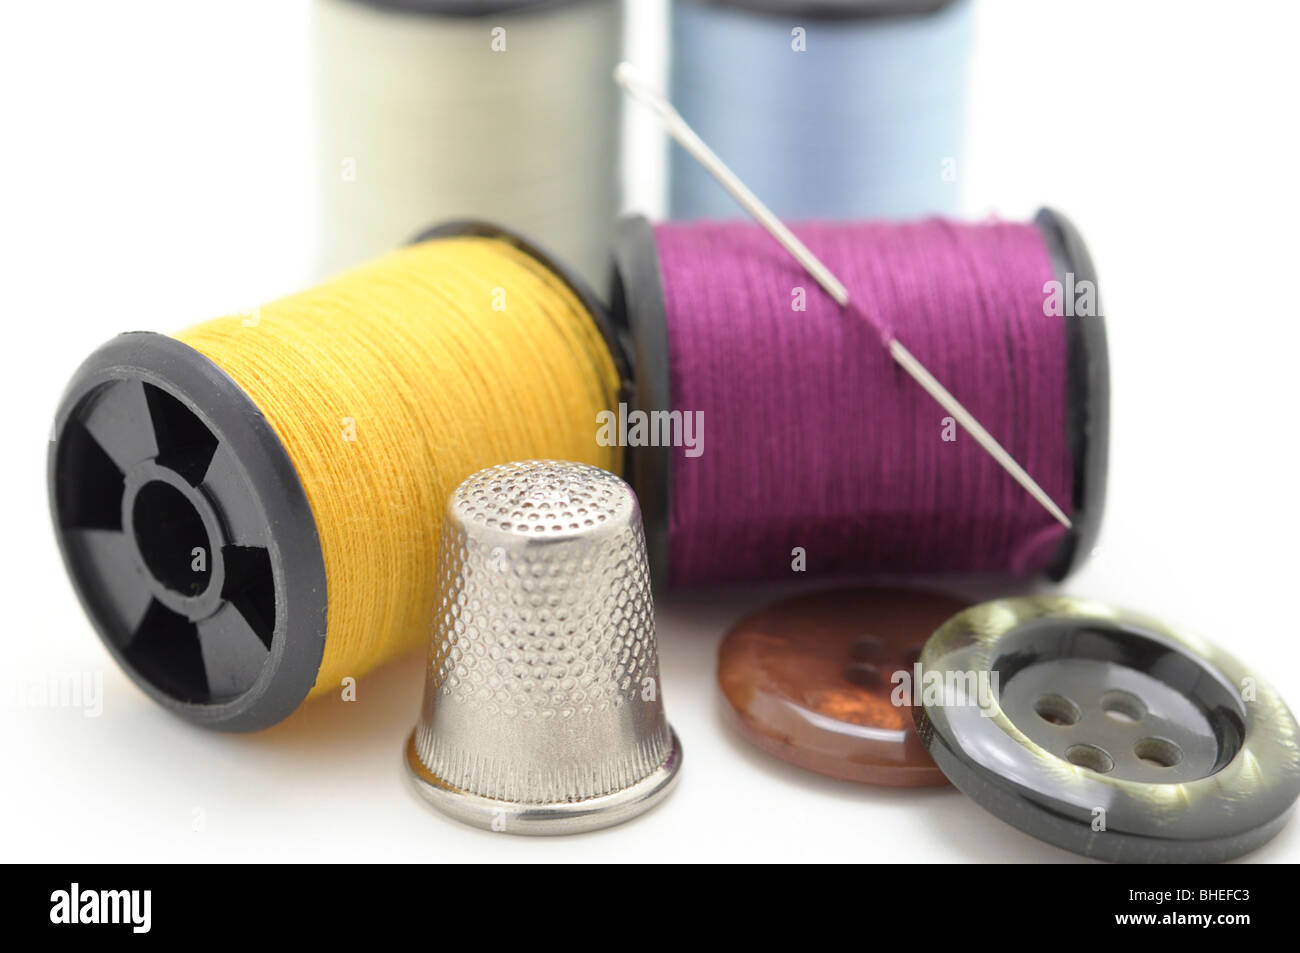 Spools of thread and Needle, Thimble and Buttons Stock Photo